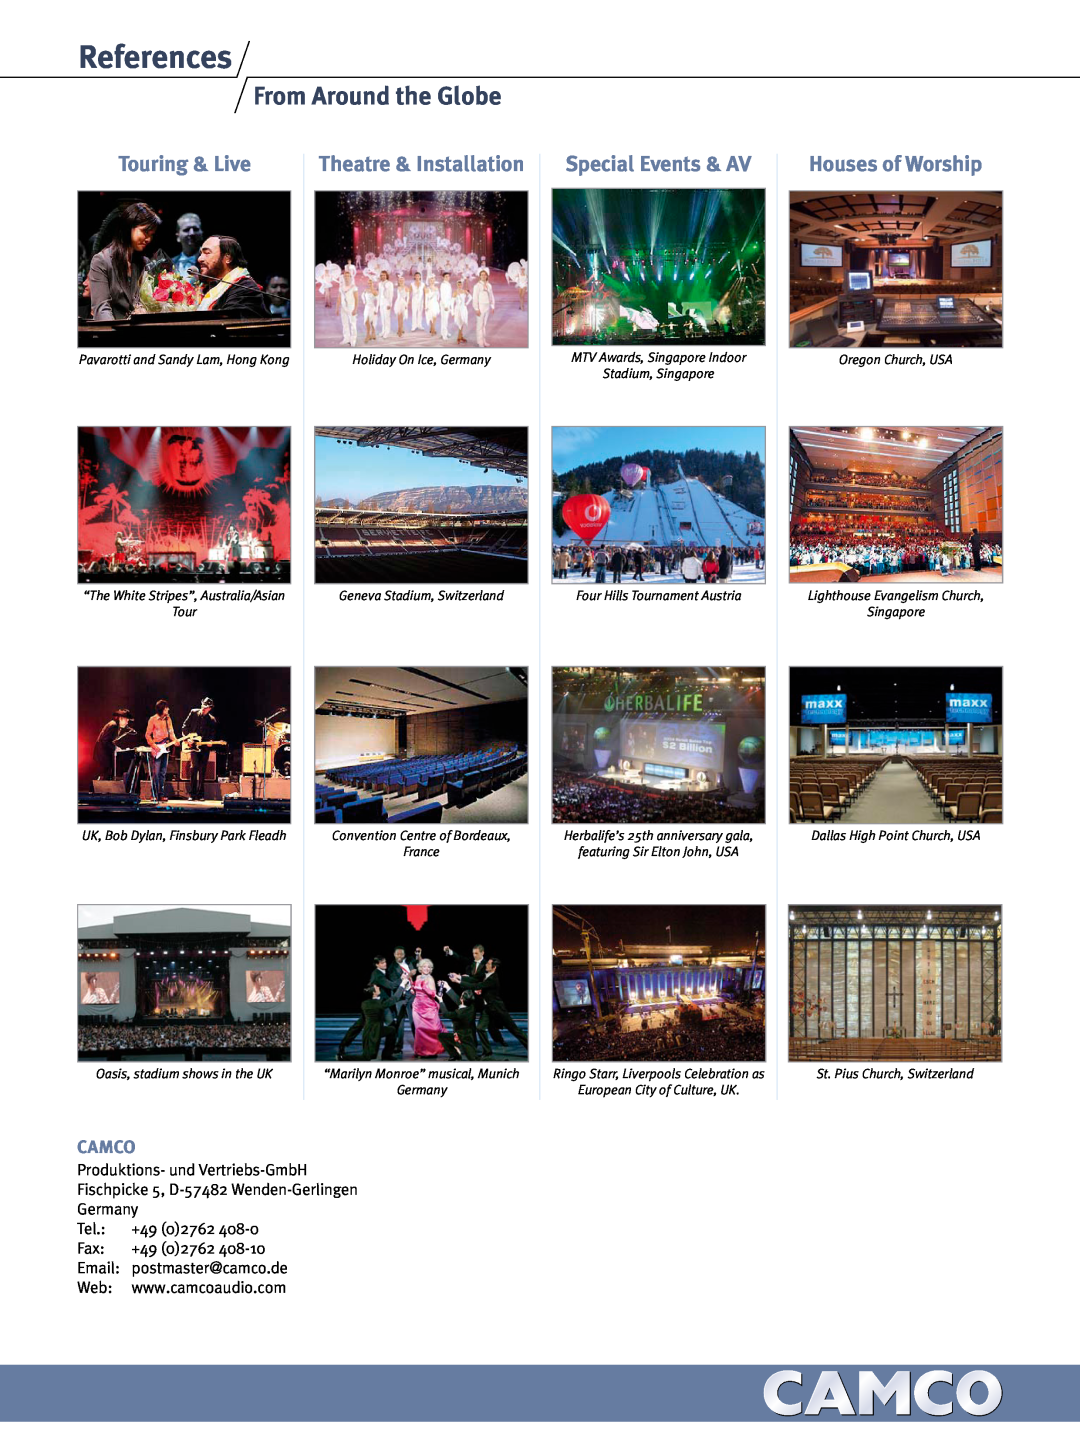 Camco Amplifier manual References, From Around the Globe, Camco, Touring & Live, Special Events & AV, Houses of Worship 